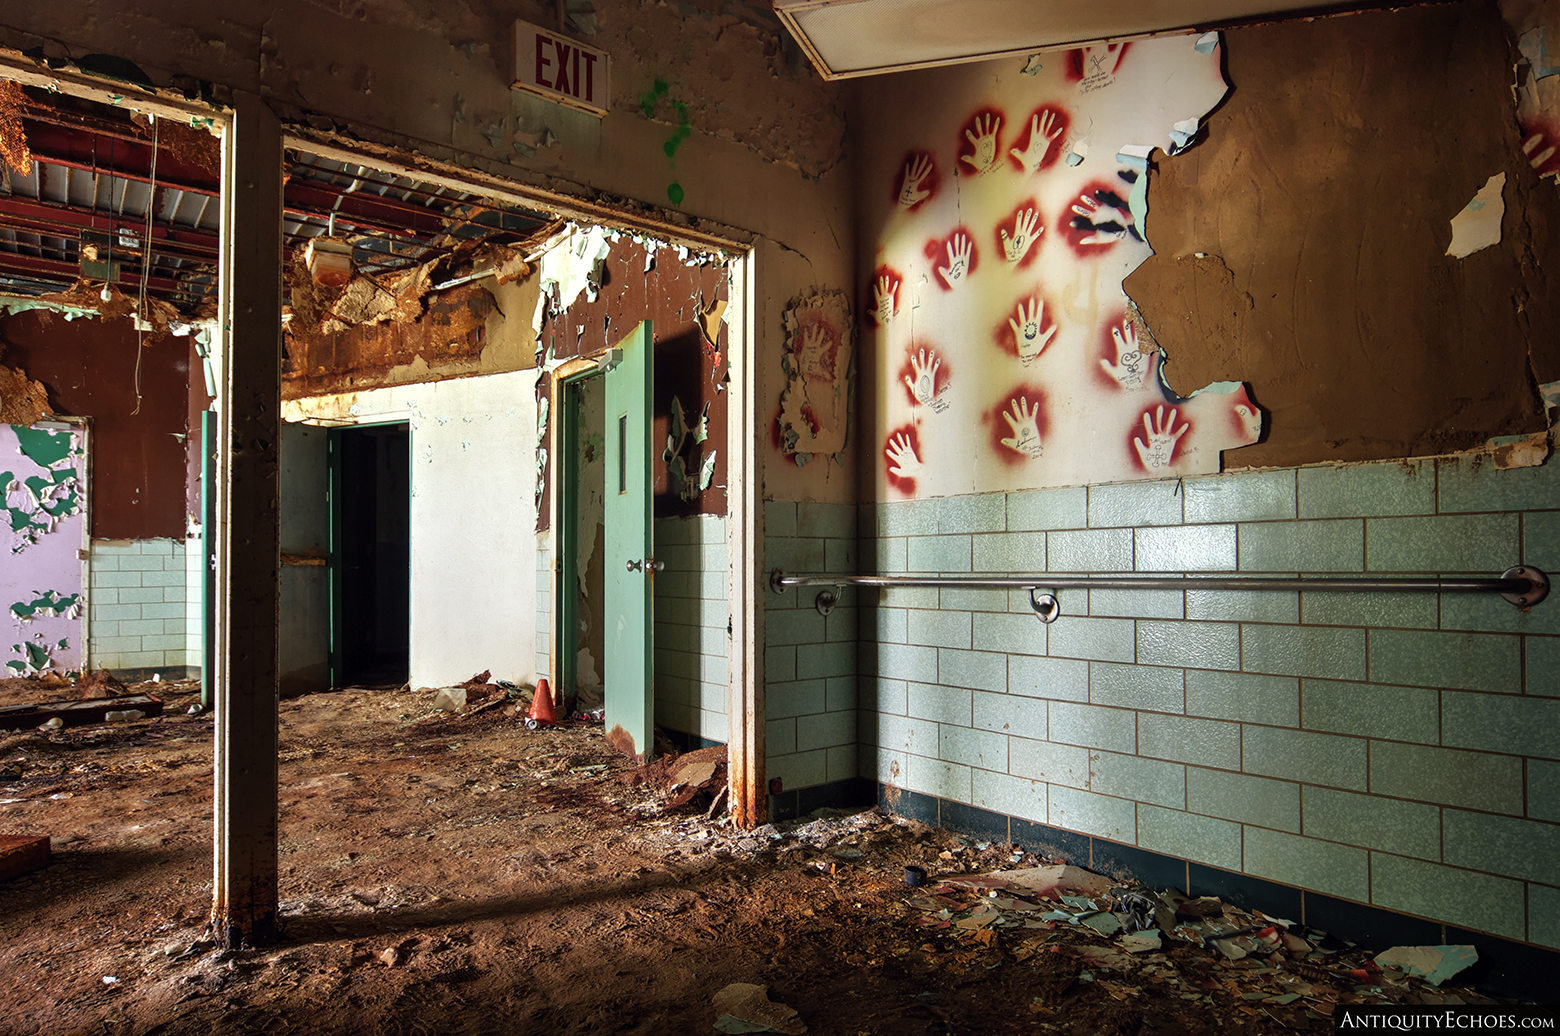 Embreeville State Hospital - Prints of those who were here before